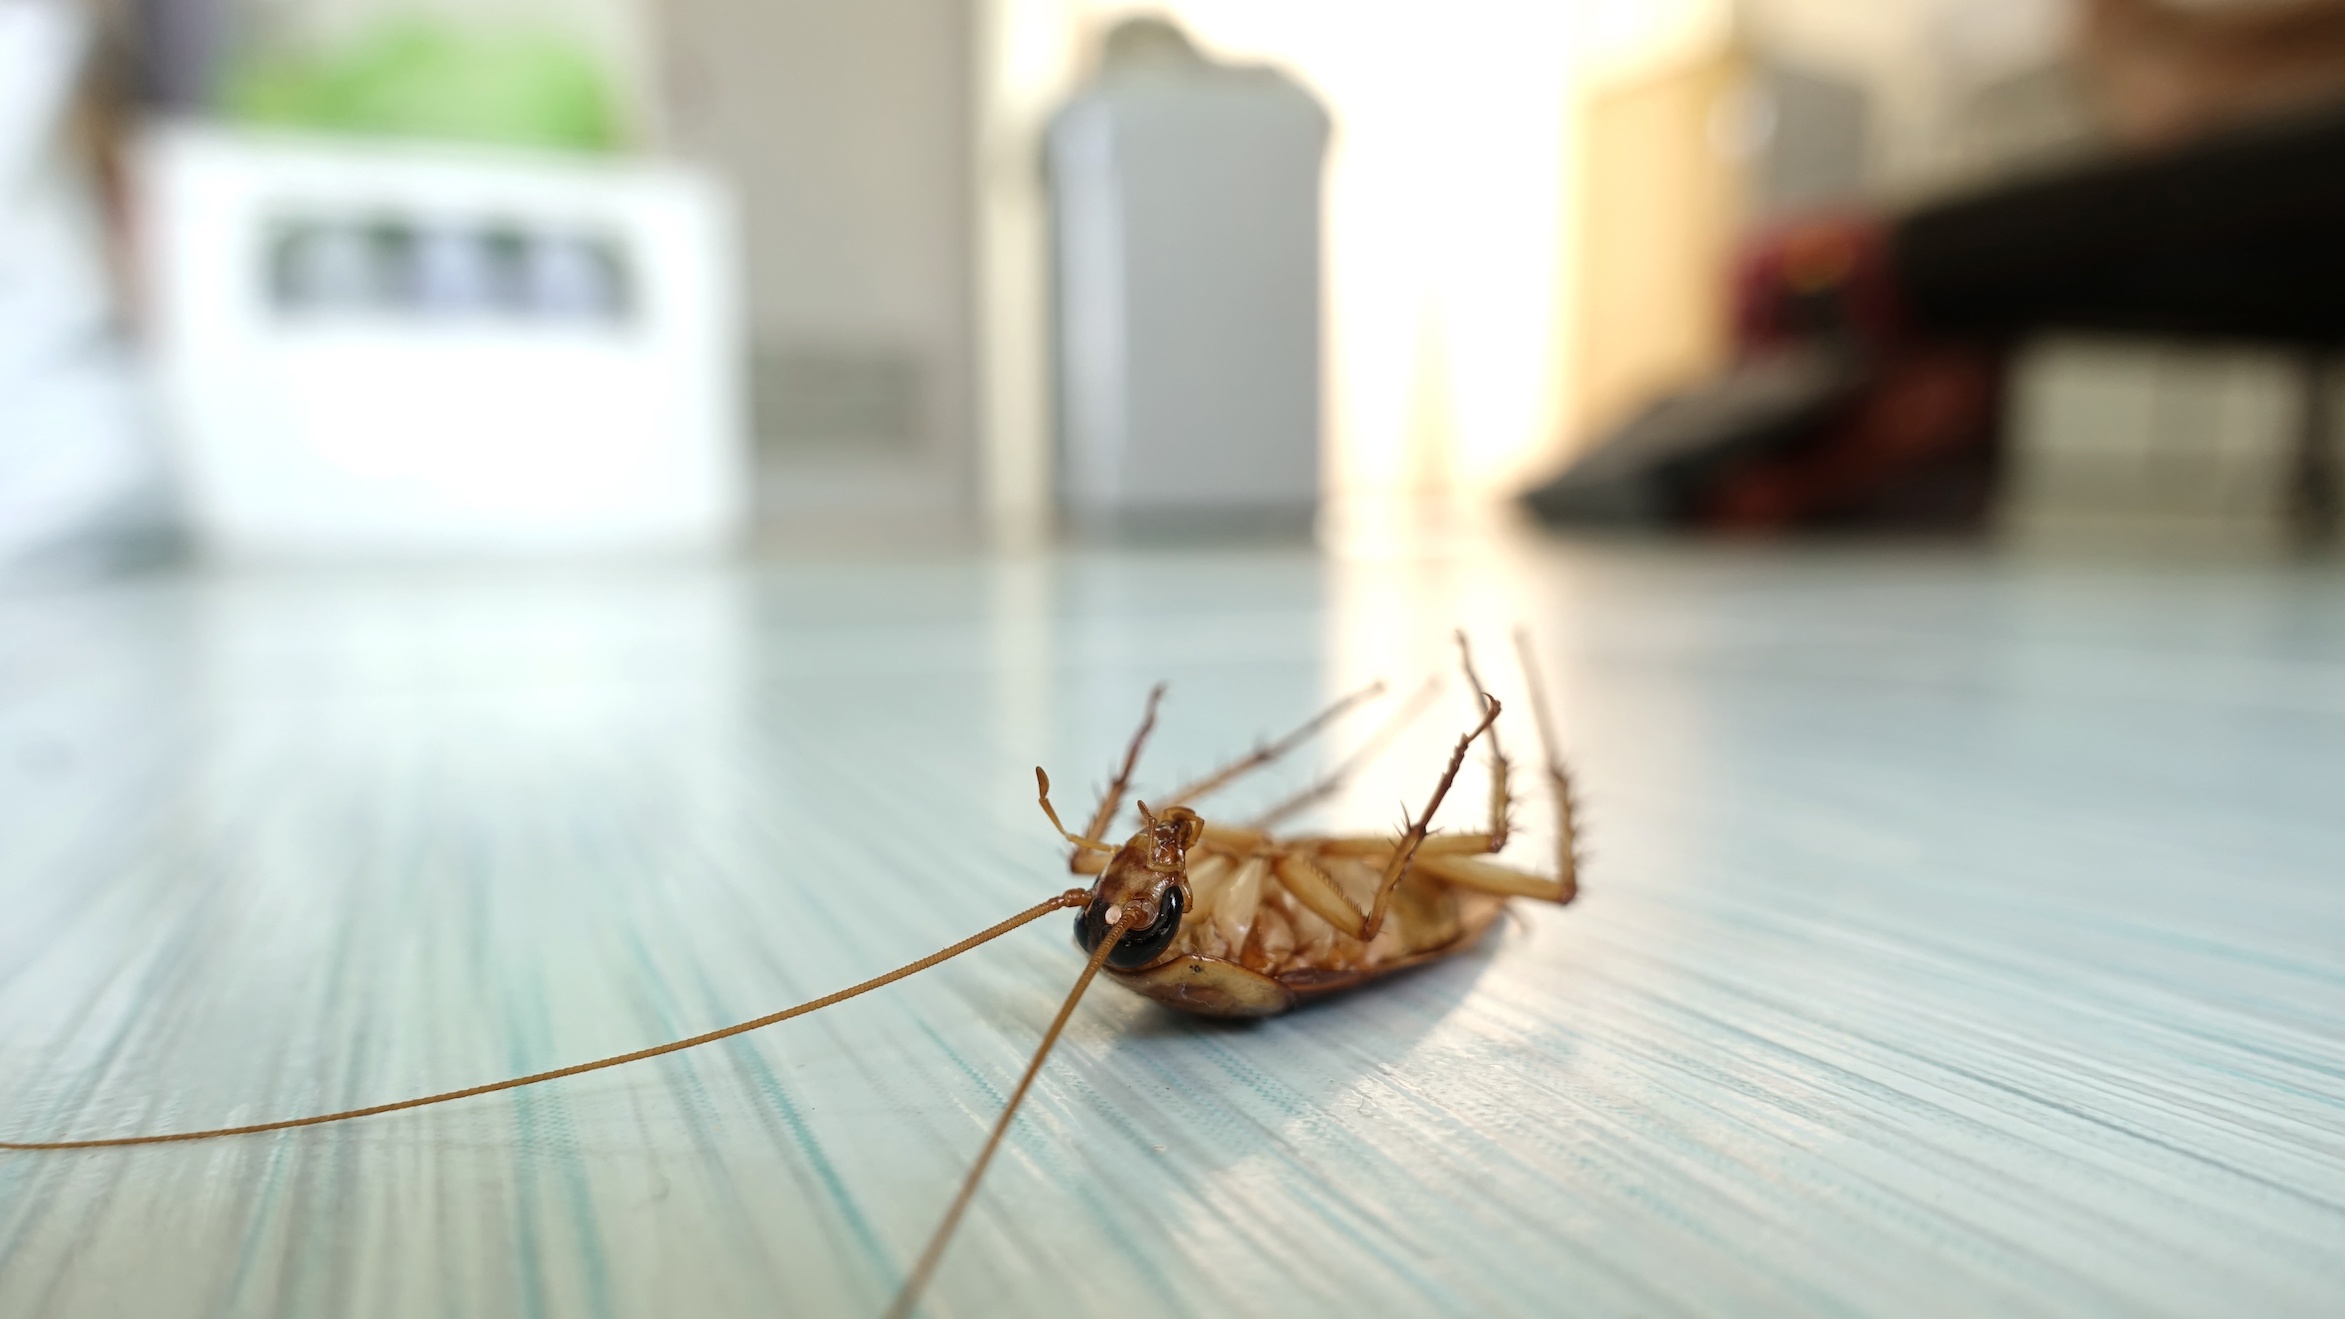 Is There Any Way to Completely Get Rid of Roaches? | San Joaquin Pest Control